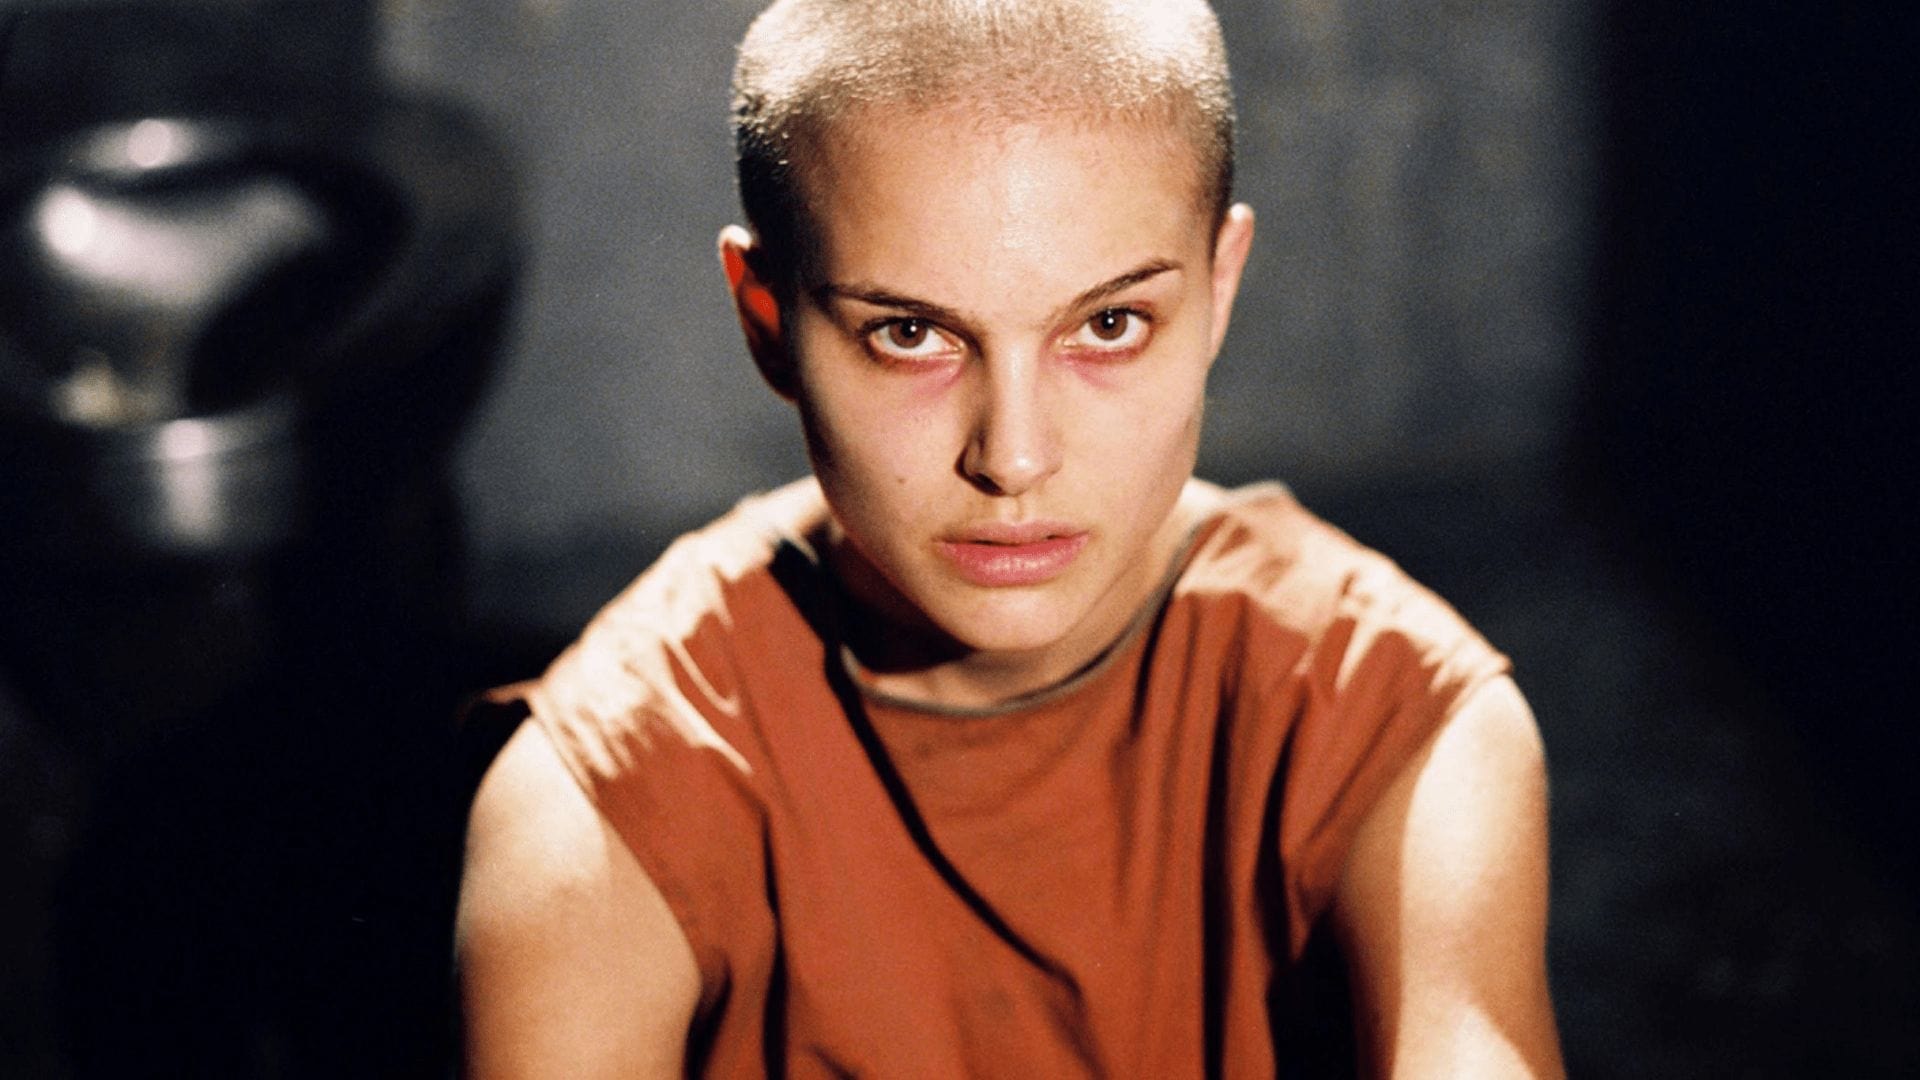 10 Unforgettable Natalie Portman Films, Ranked from Good to Great